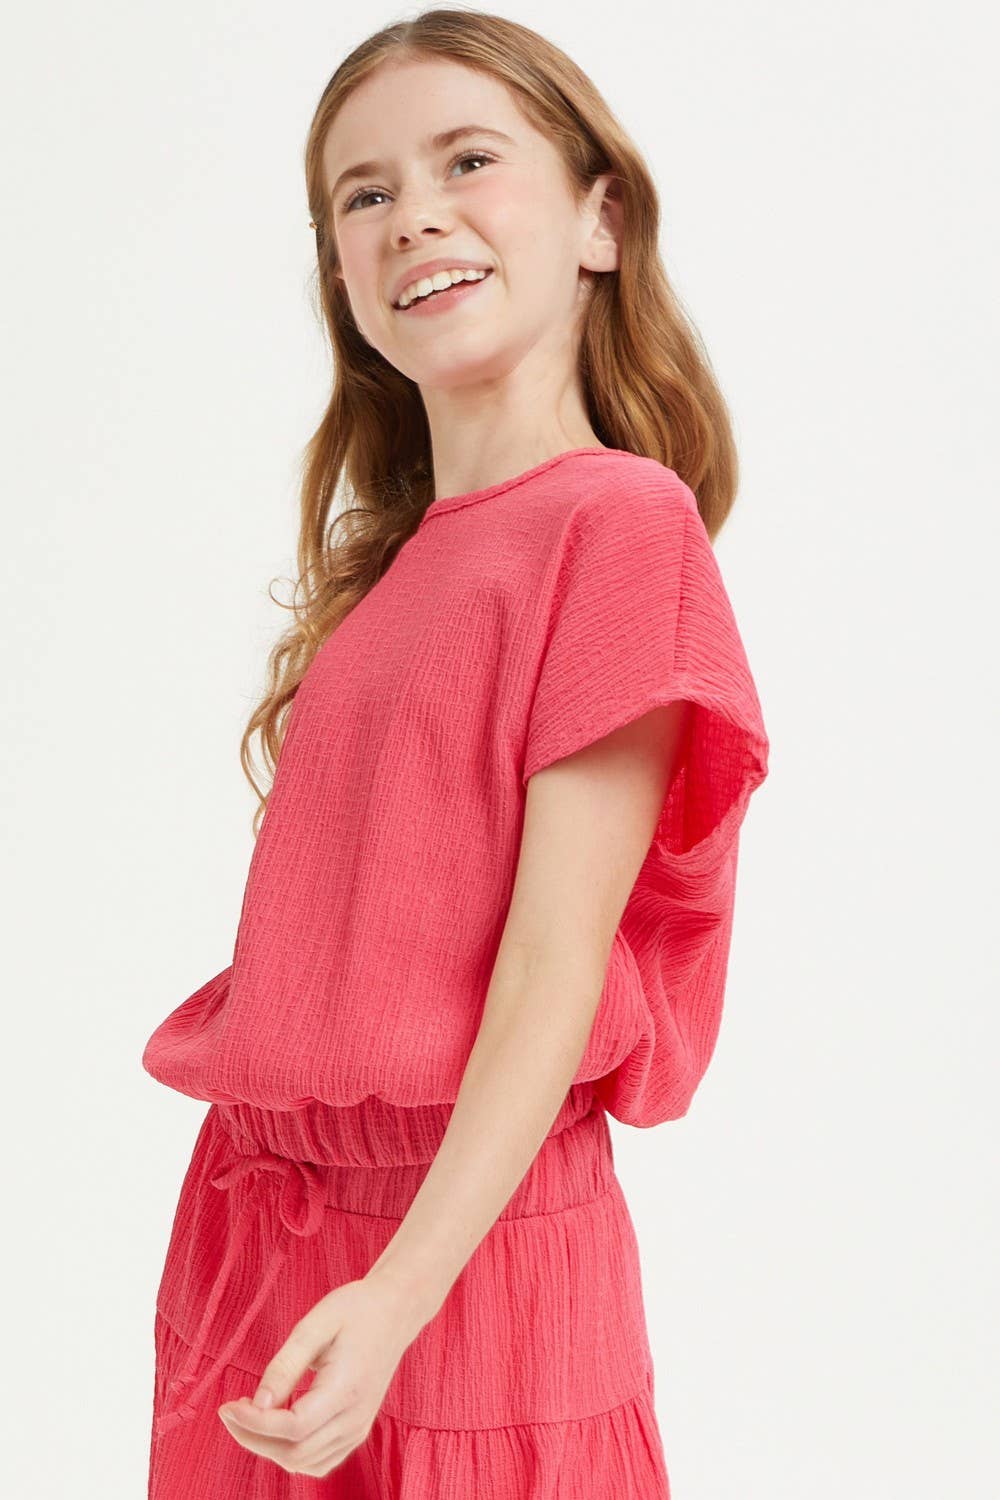 The Addison Top in Hot Pink